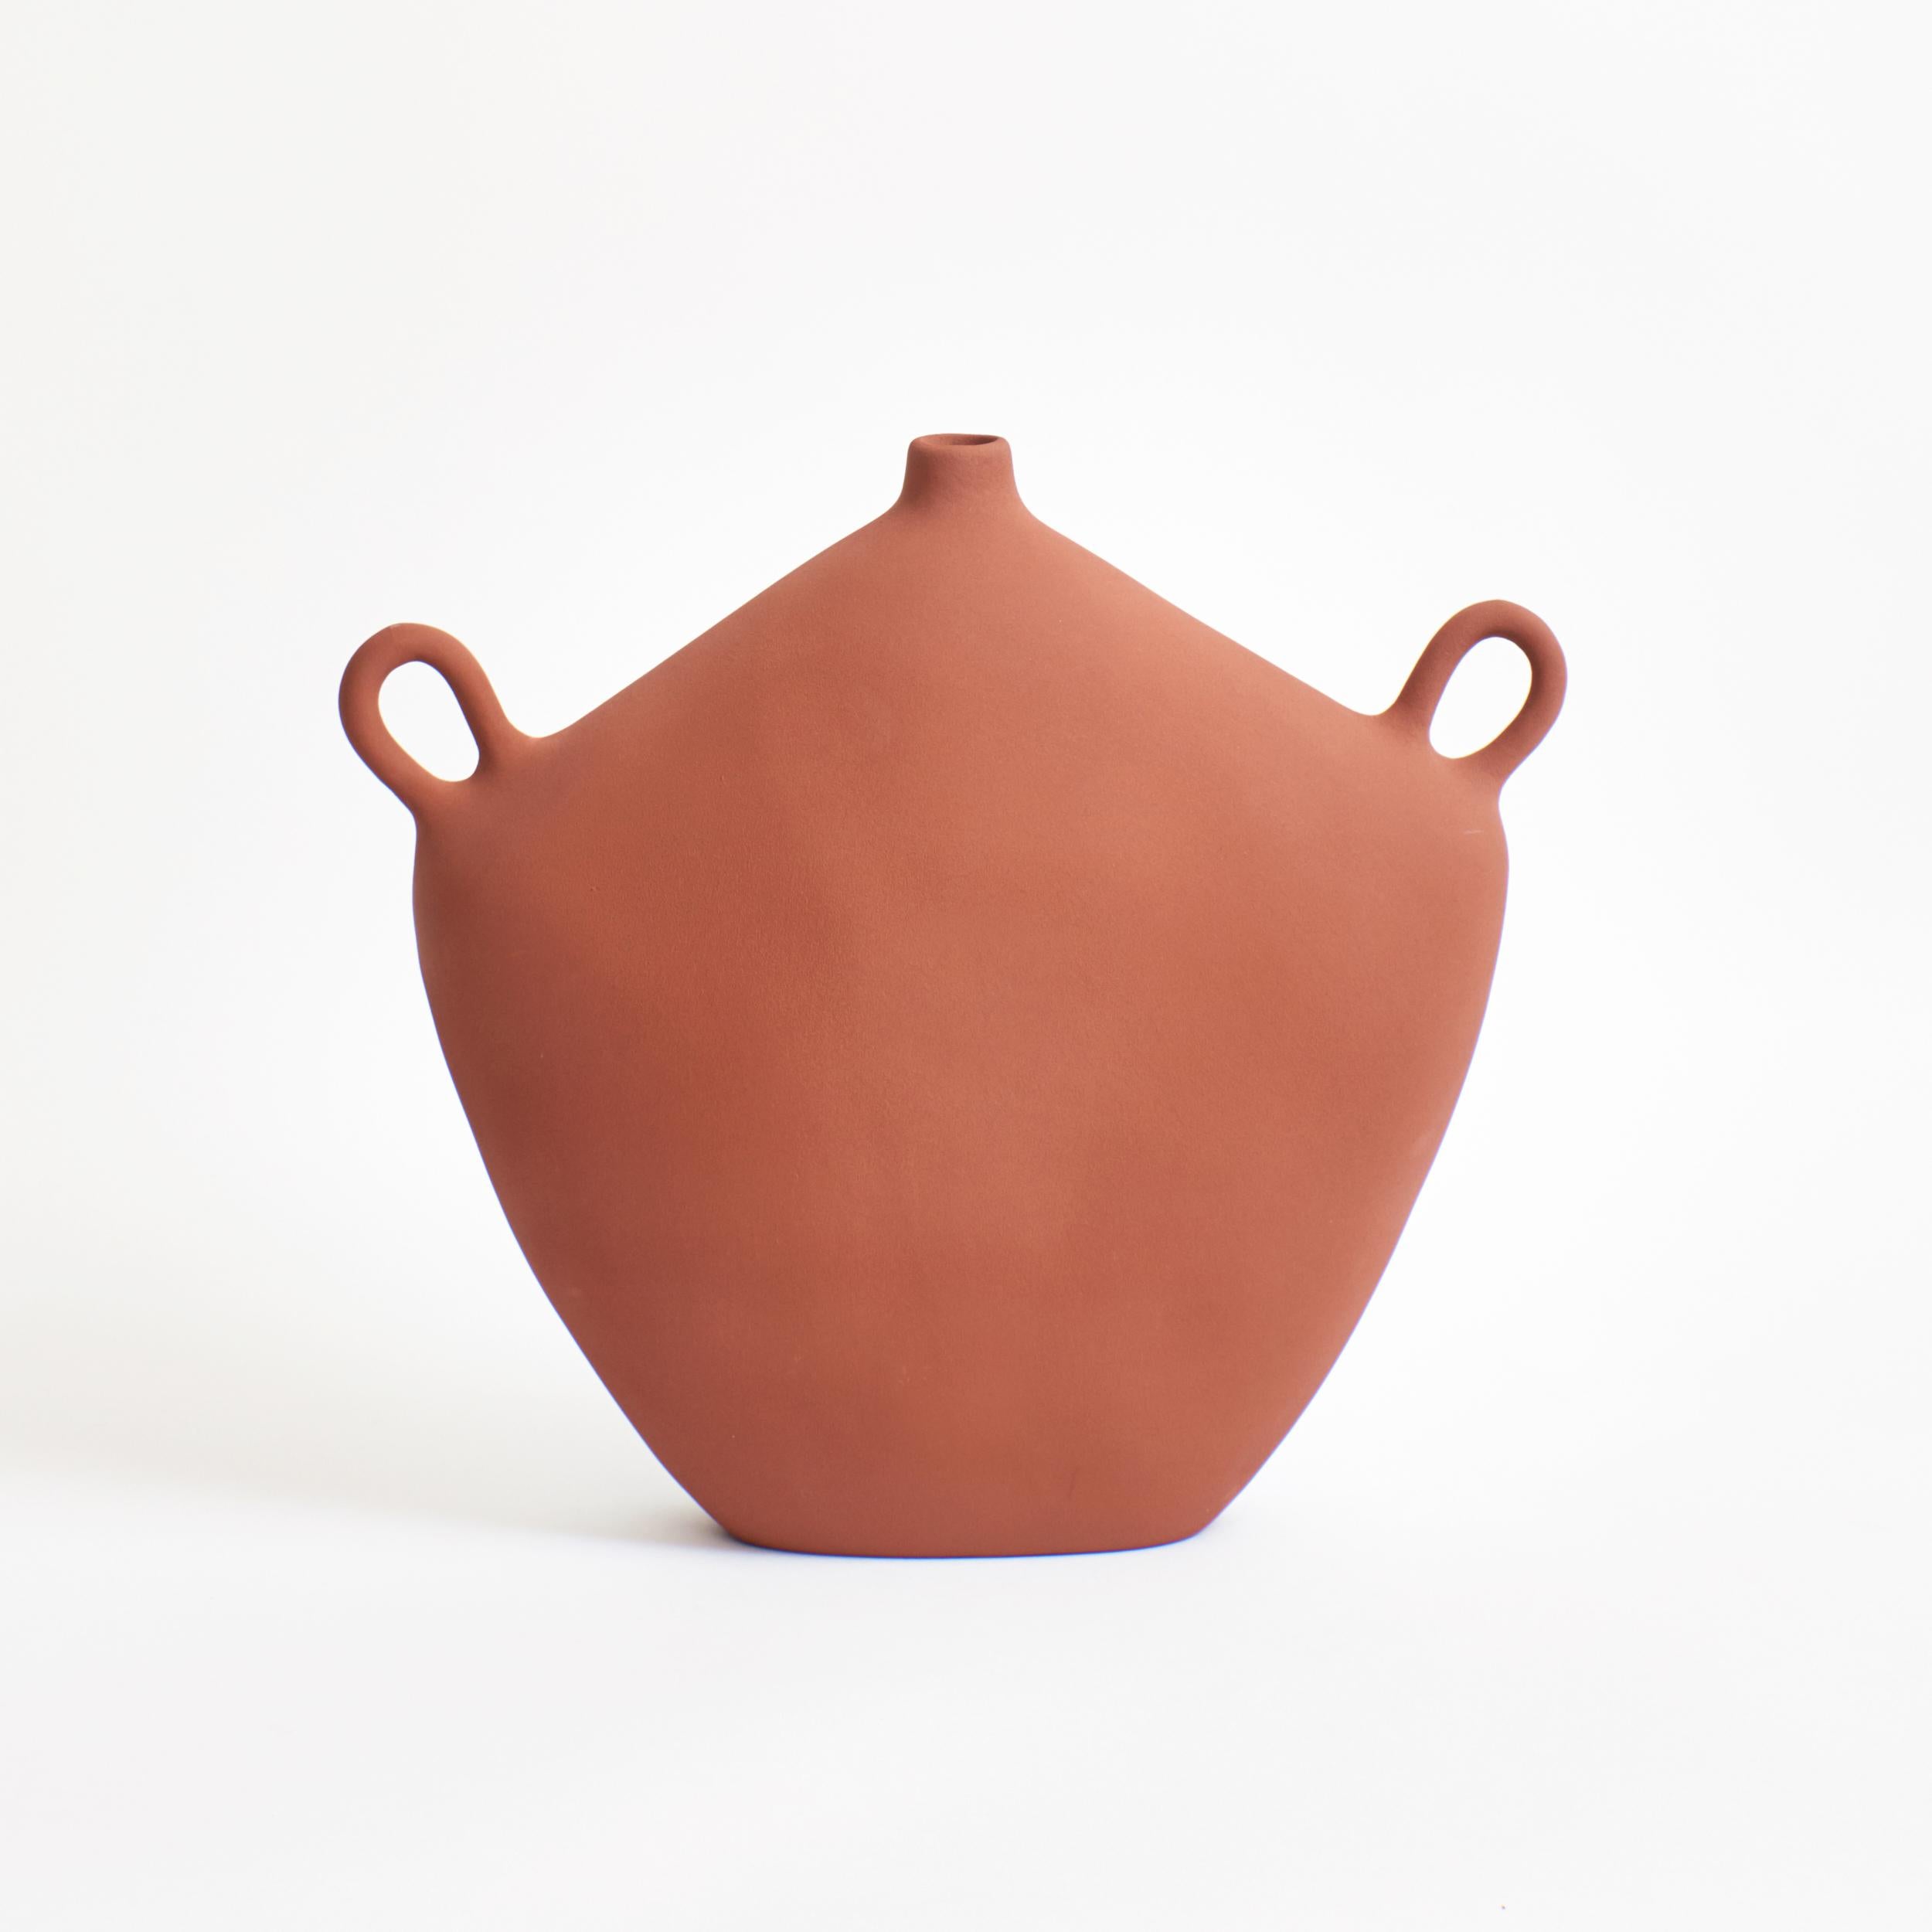 Maria Vessel in Brick
Designed by Project 213A in 2020
Handmade Stoneware

This vase is inspired by the Greco-Roman period, having a timeless appearance and finished with a contemporary textured shiny glaze. Each piece develops its own distinctive